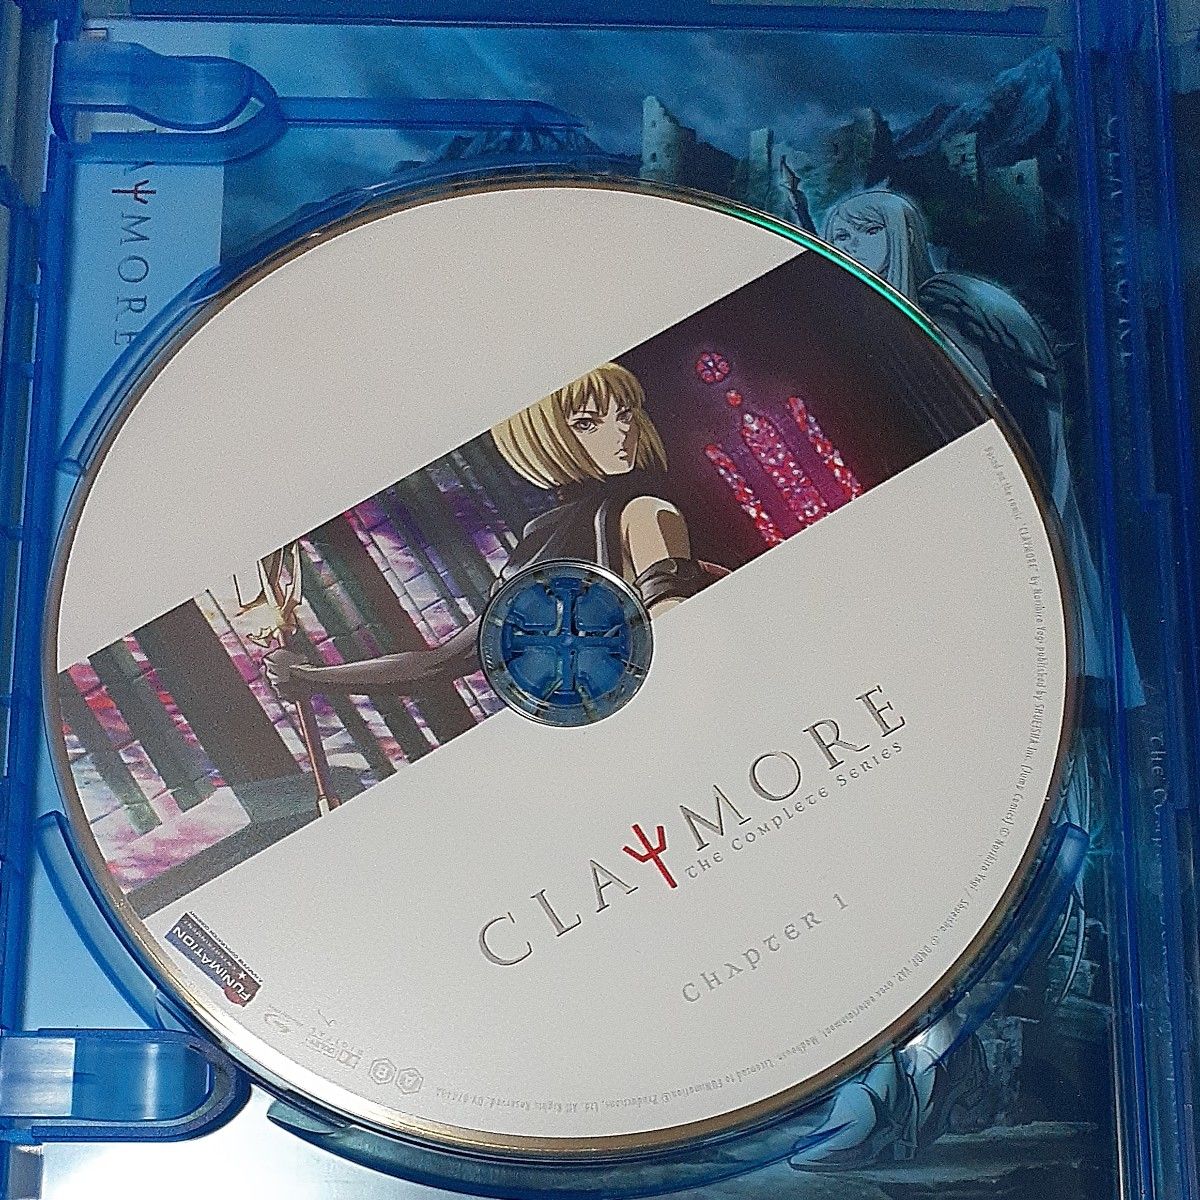 CLAYMORE THE COMPLETE SERIES ブルーレイ 海外版